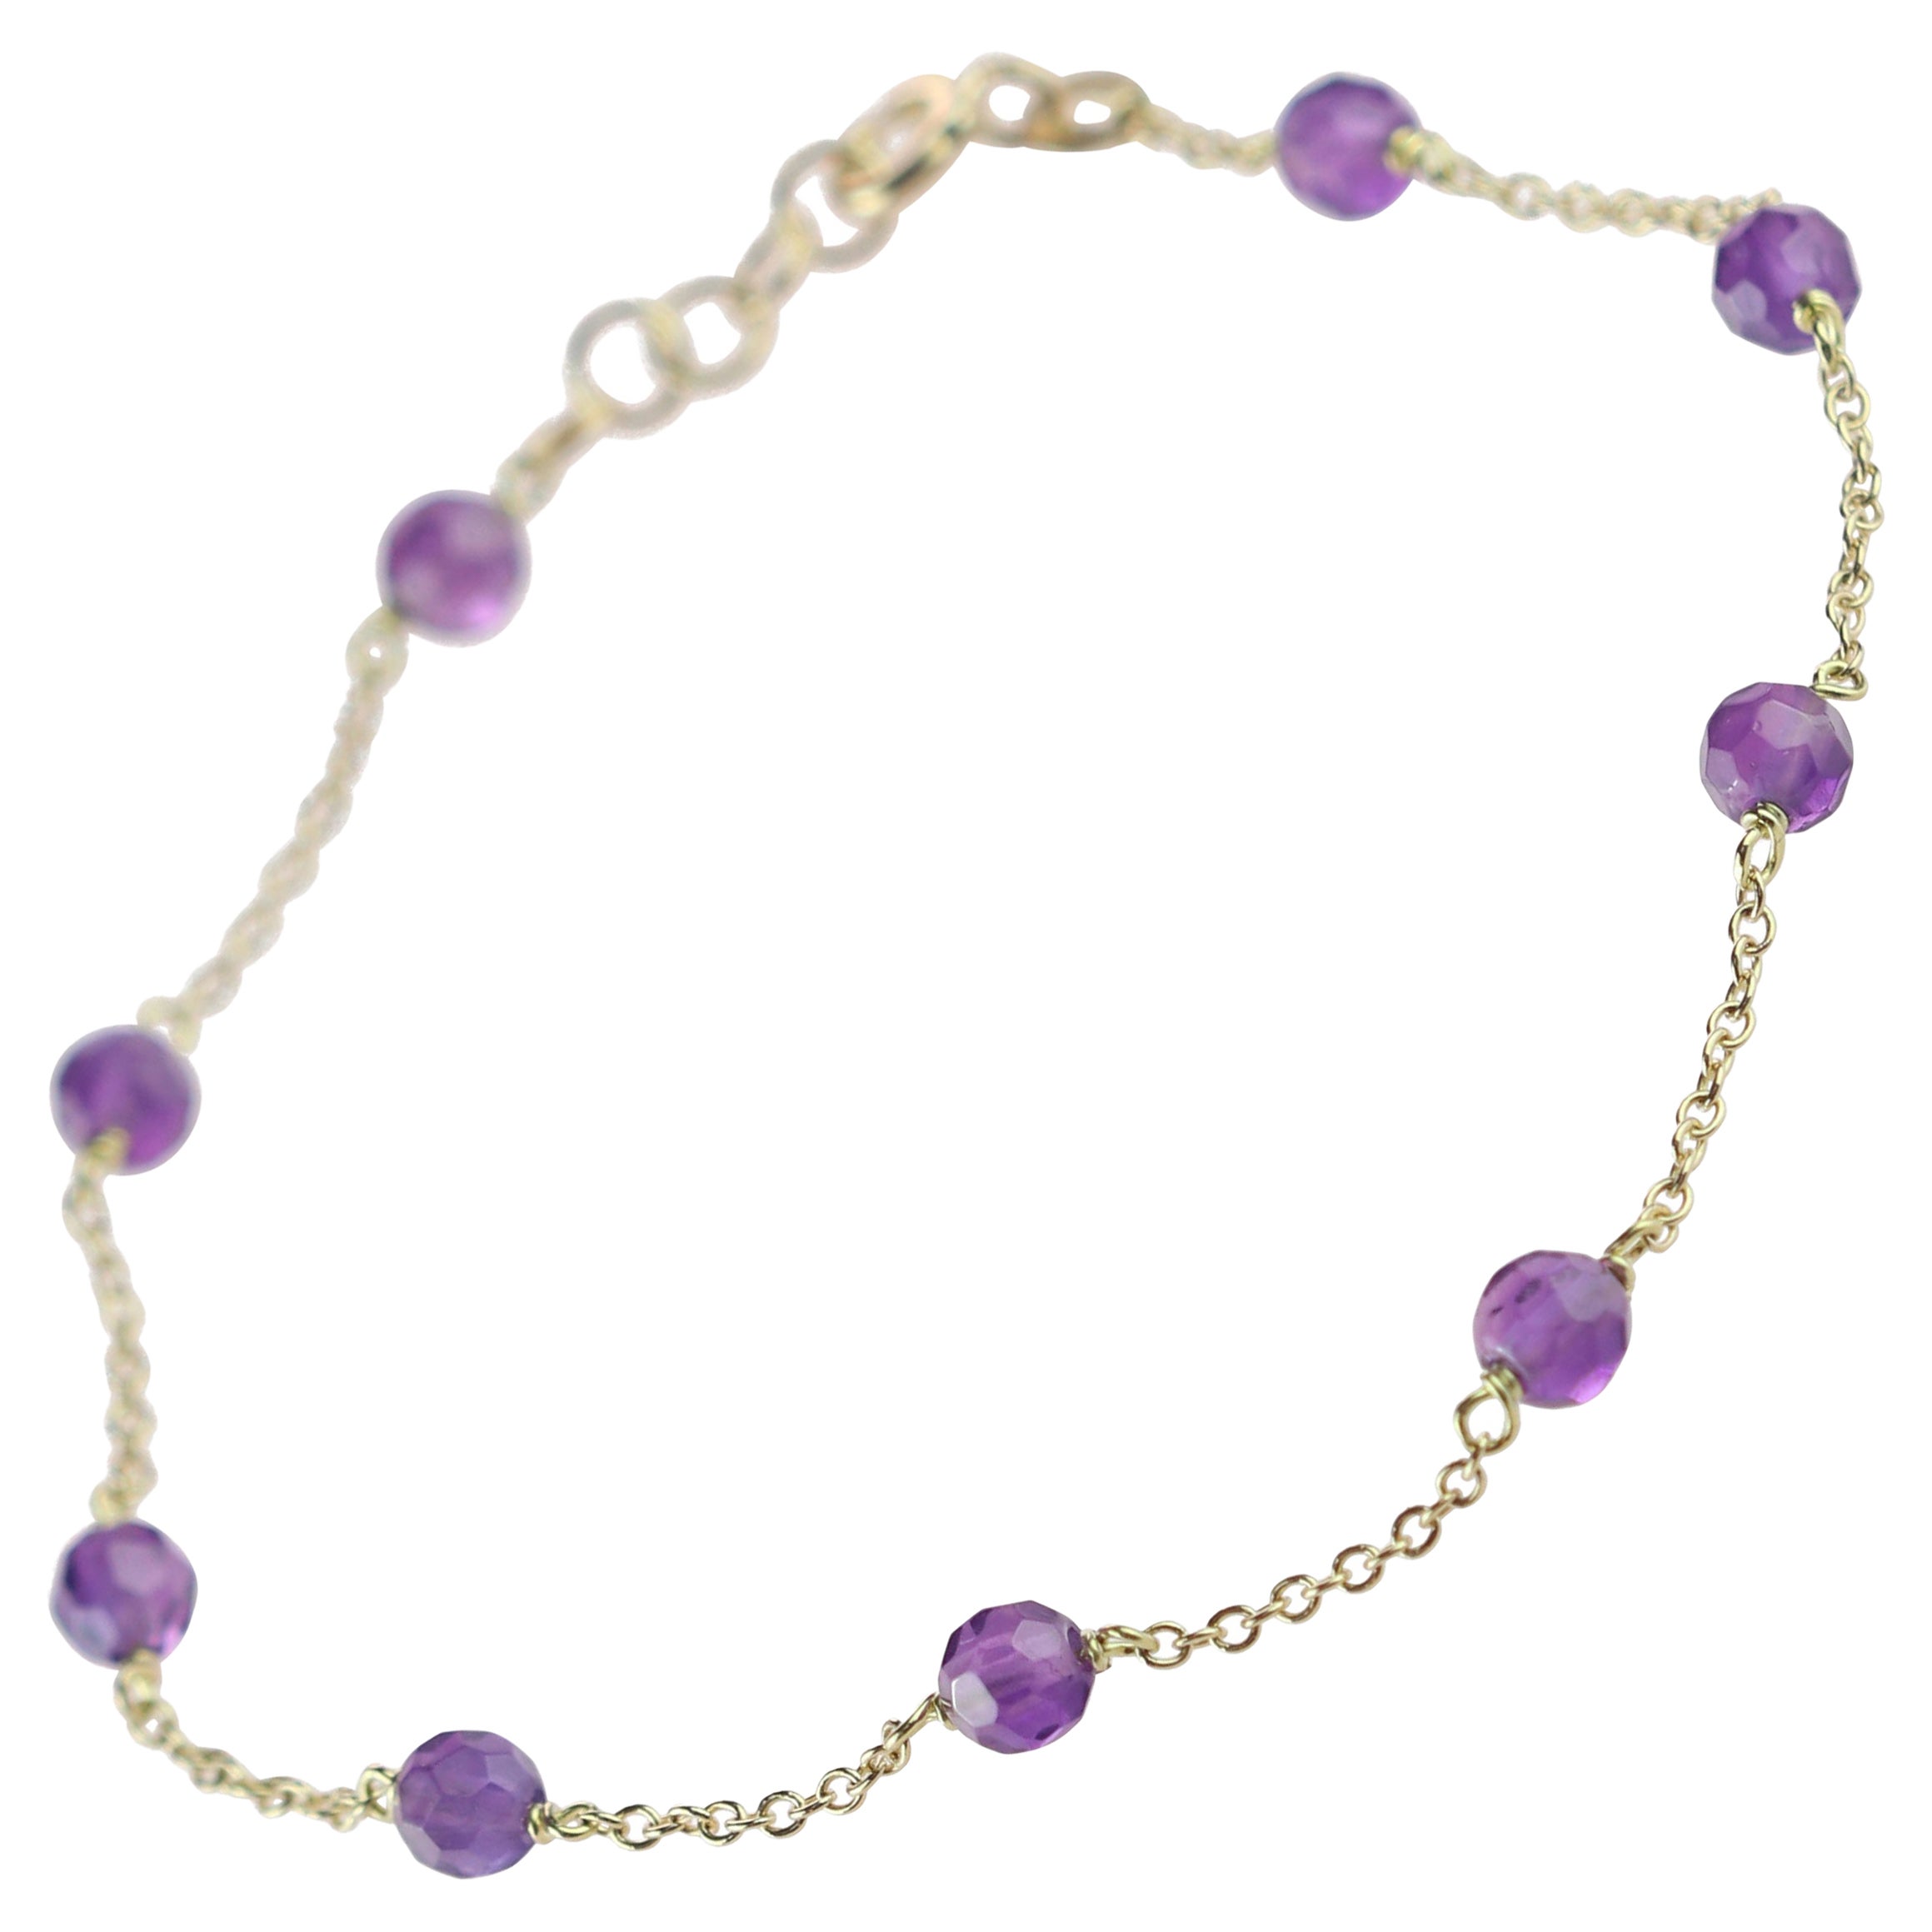 Intini Jewels Gold Plate Chain Amethyst Rondelles Handmade Cocktail Bracelet For Sale